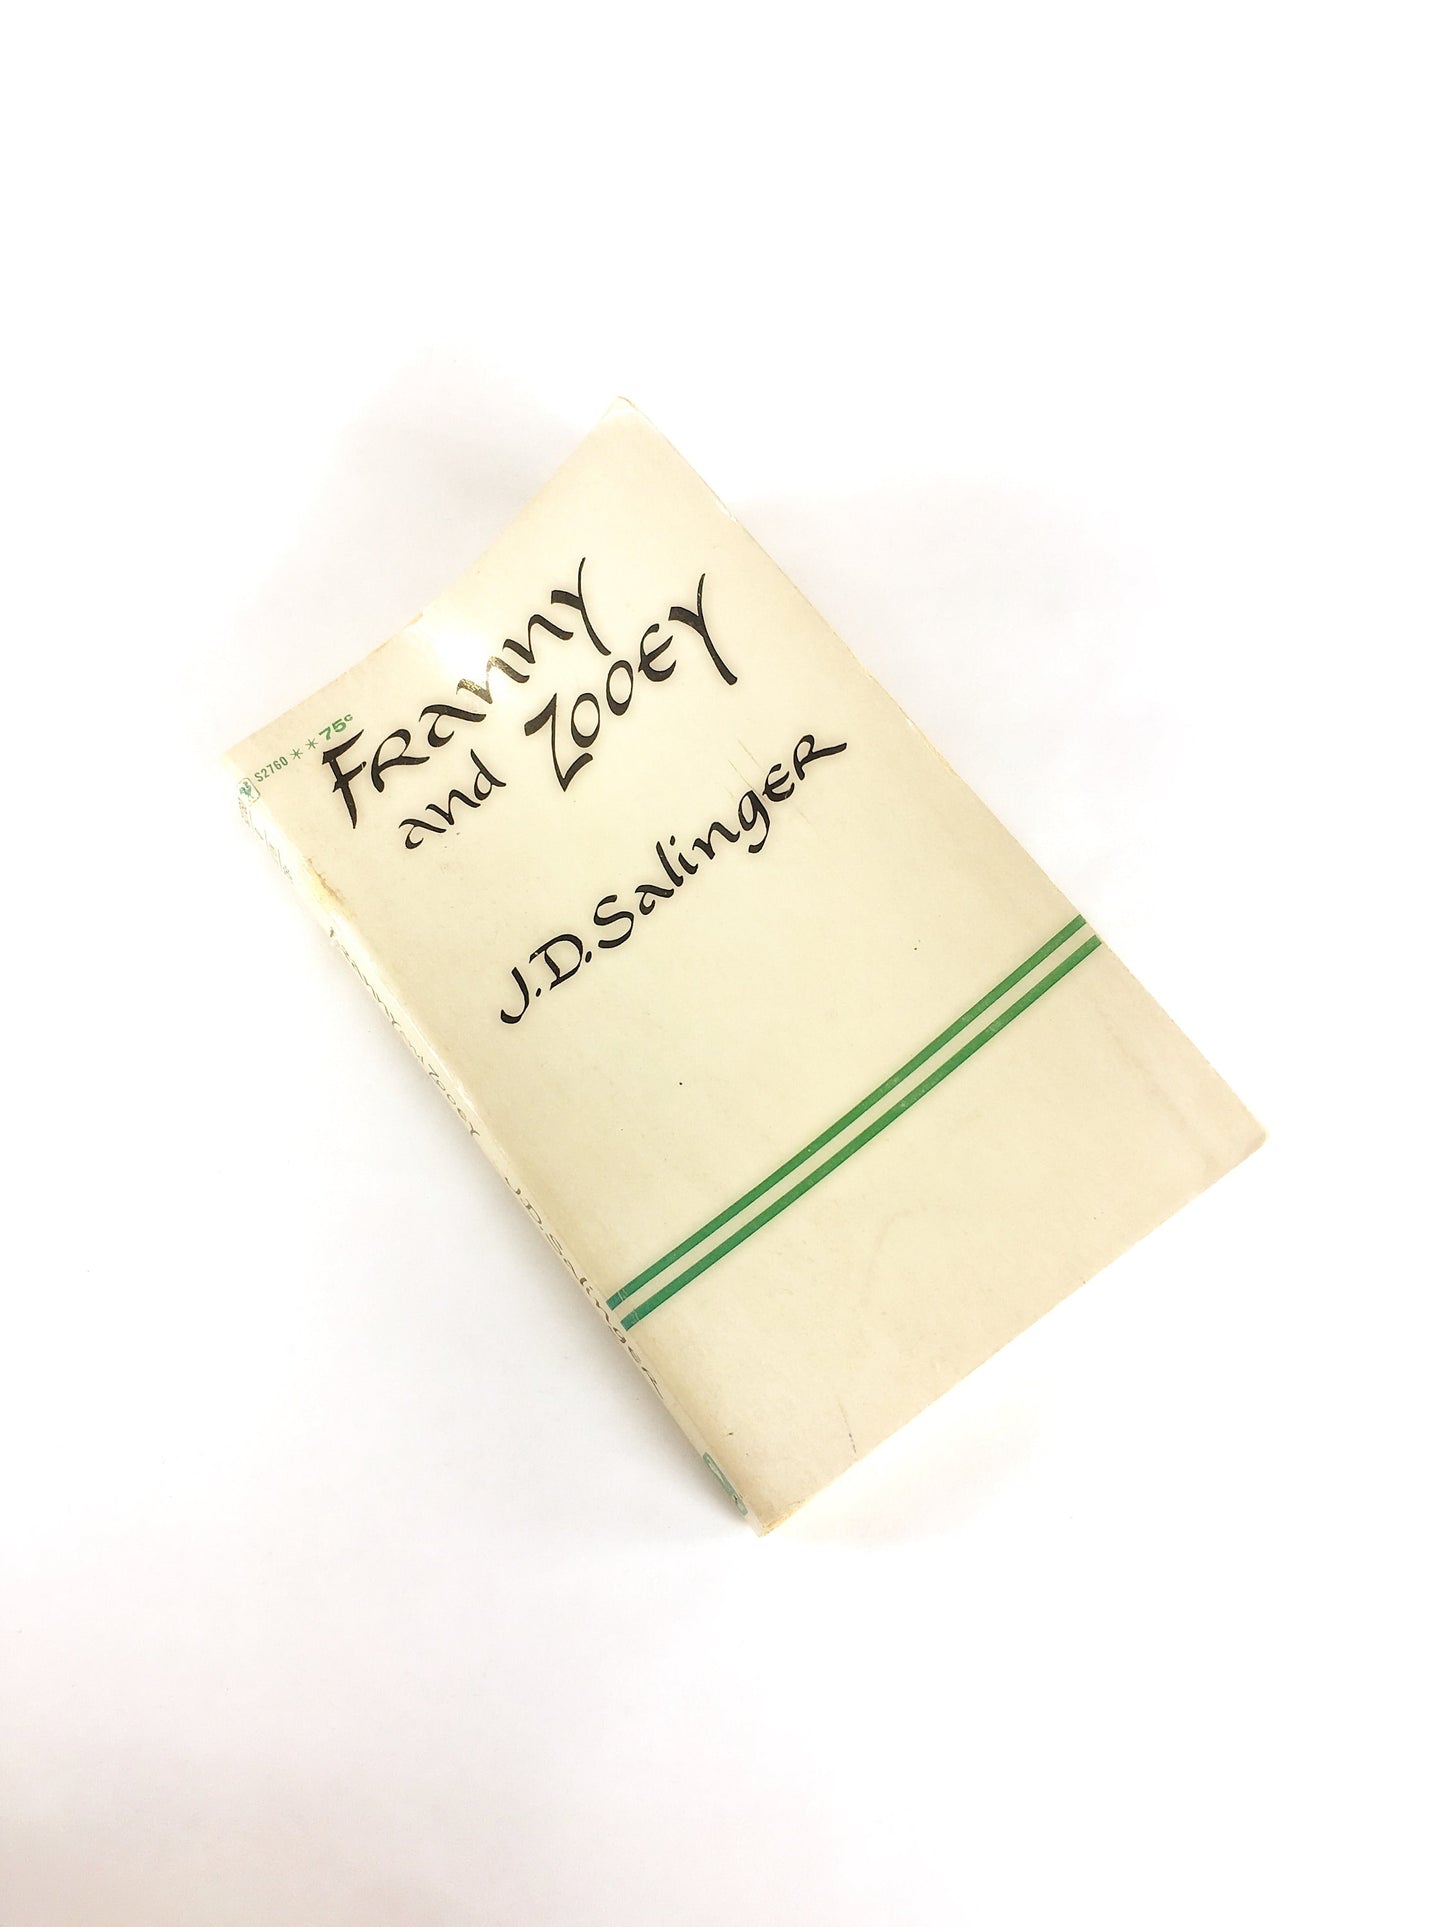 1962 Franny and Zooey book by JD Salinger Vintage paperback book Centered around a family's spiritual and existential breakdown Teen reading